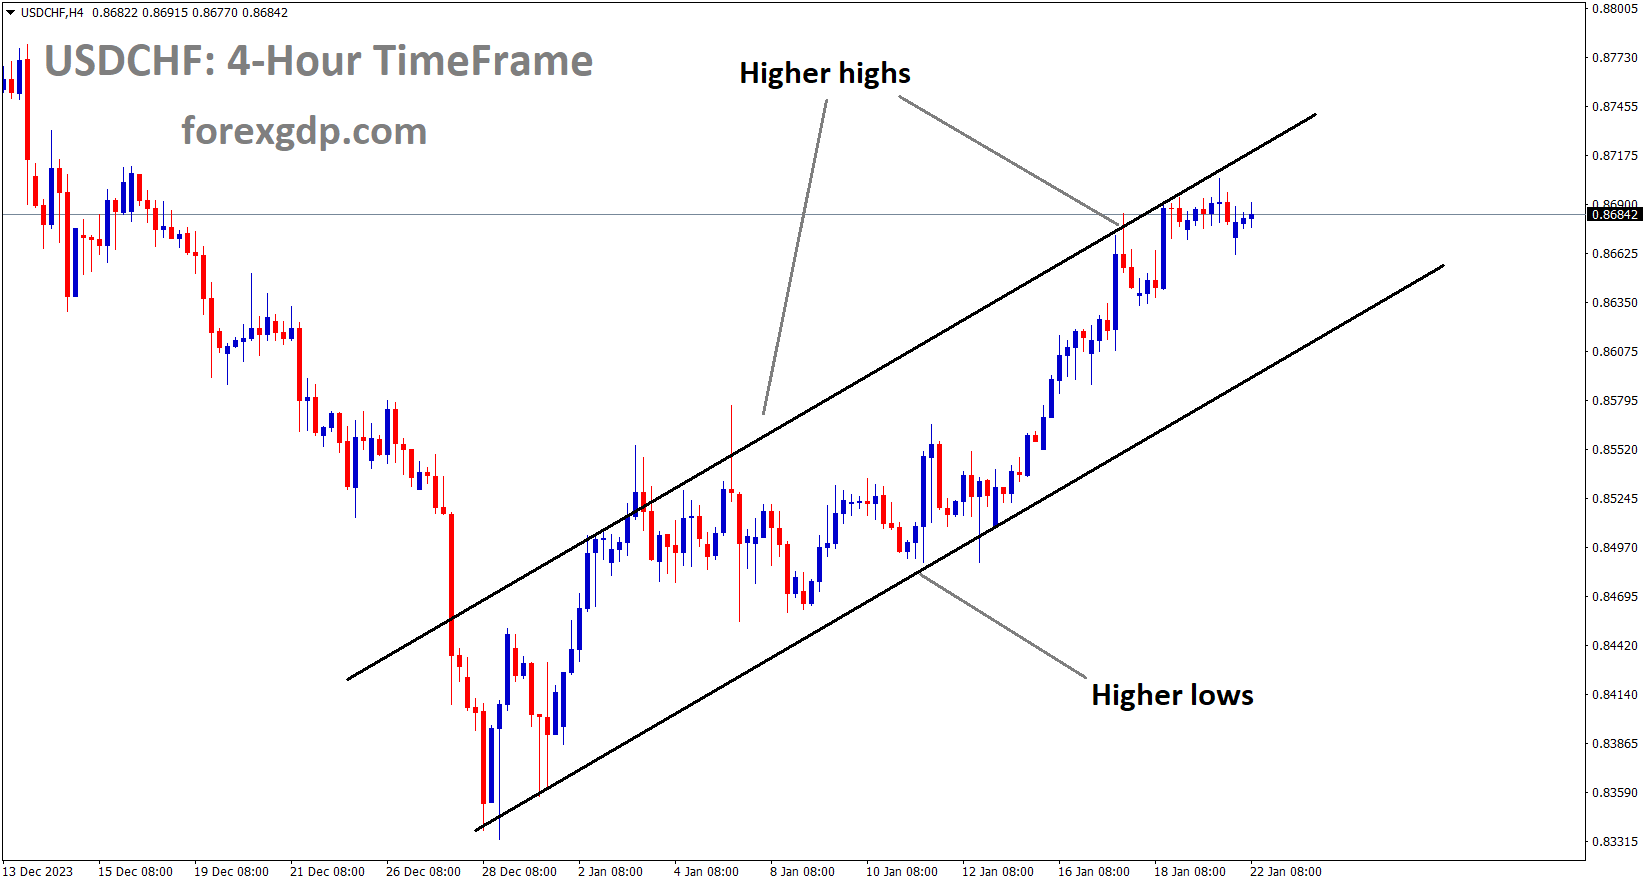 USDCHF is moving in an Ascending channel and the market has reached the higher high area of the channel